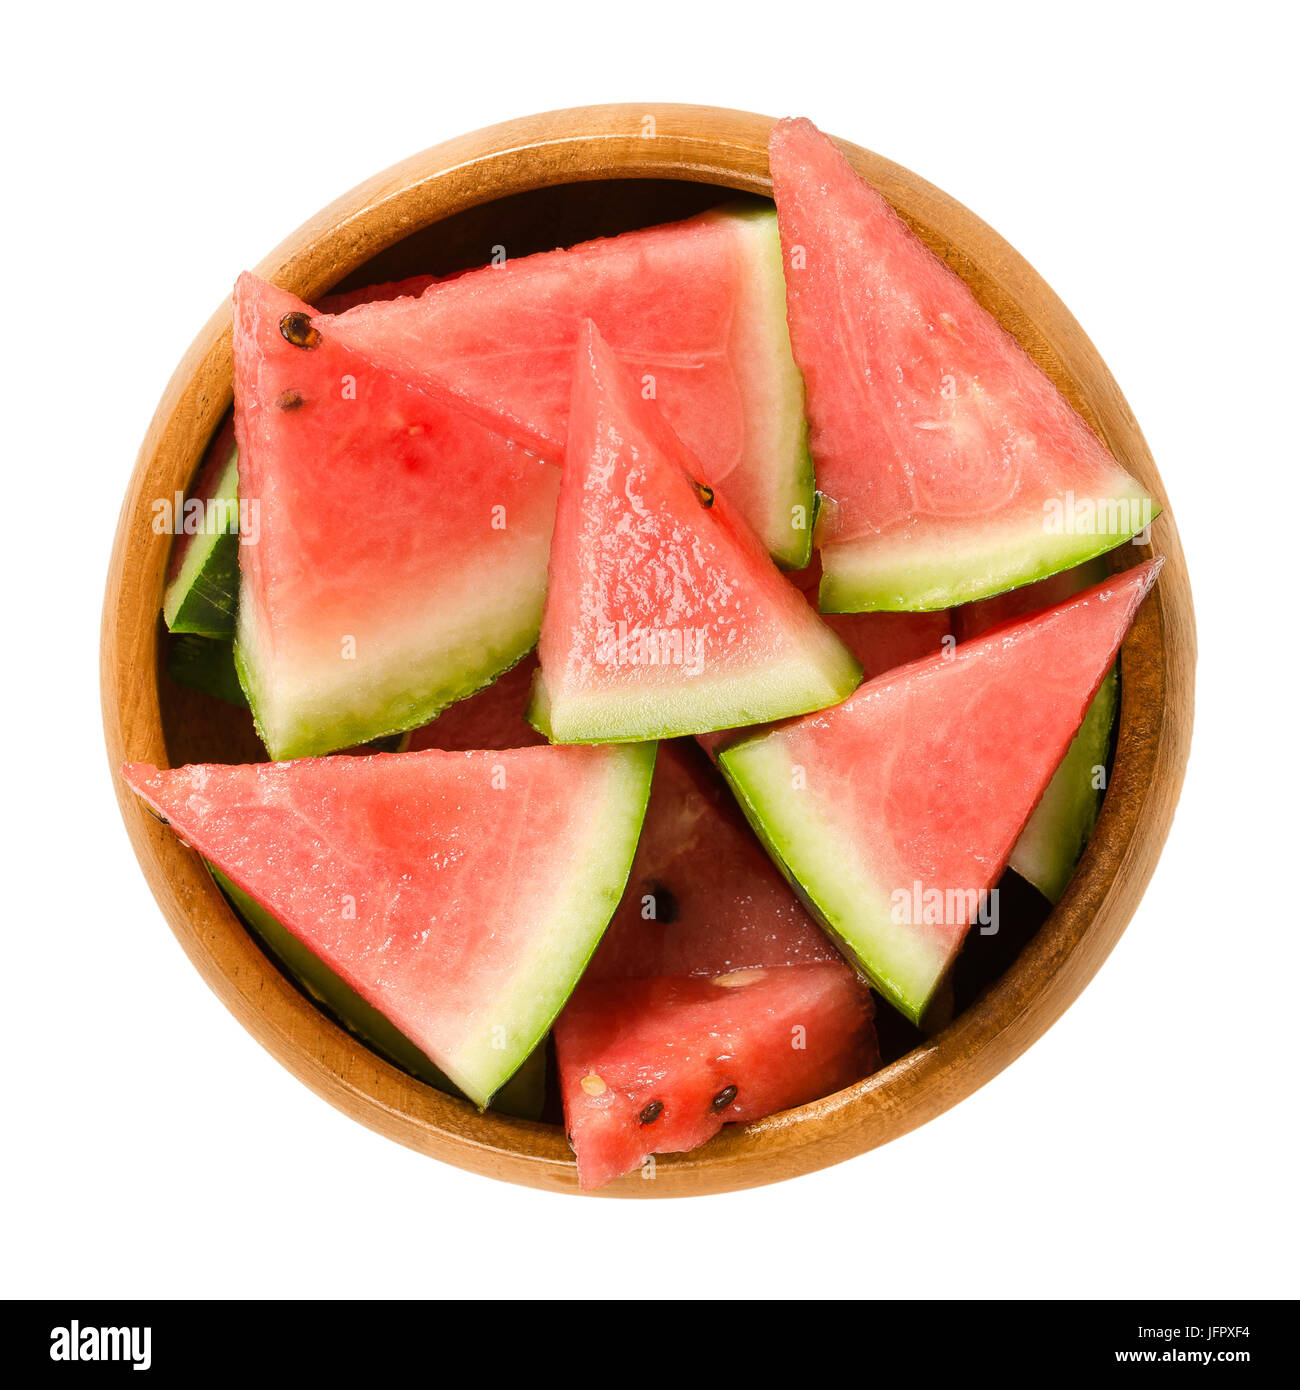 Watermelon slices in wooden bowl. Triangular pieces of raw Citrullus lanatus. Edible fruit with green hard rind, black seeds and red, sweet flesh. Stock Photo